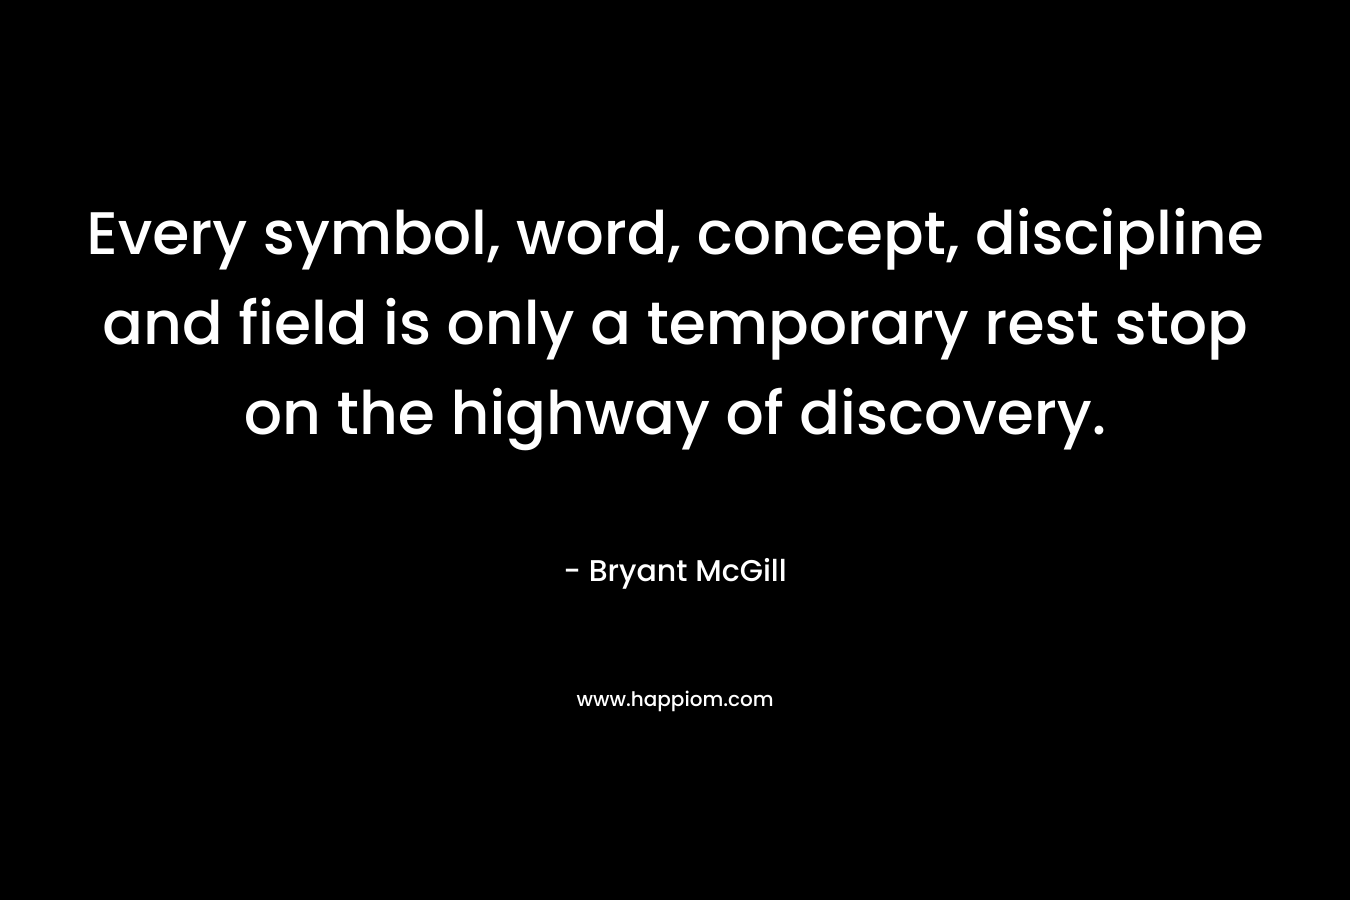 Every symbol, word, concept, discipline and field is only a temporary rest stop on the highway of discovery. – Bryant McGill